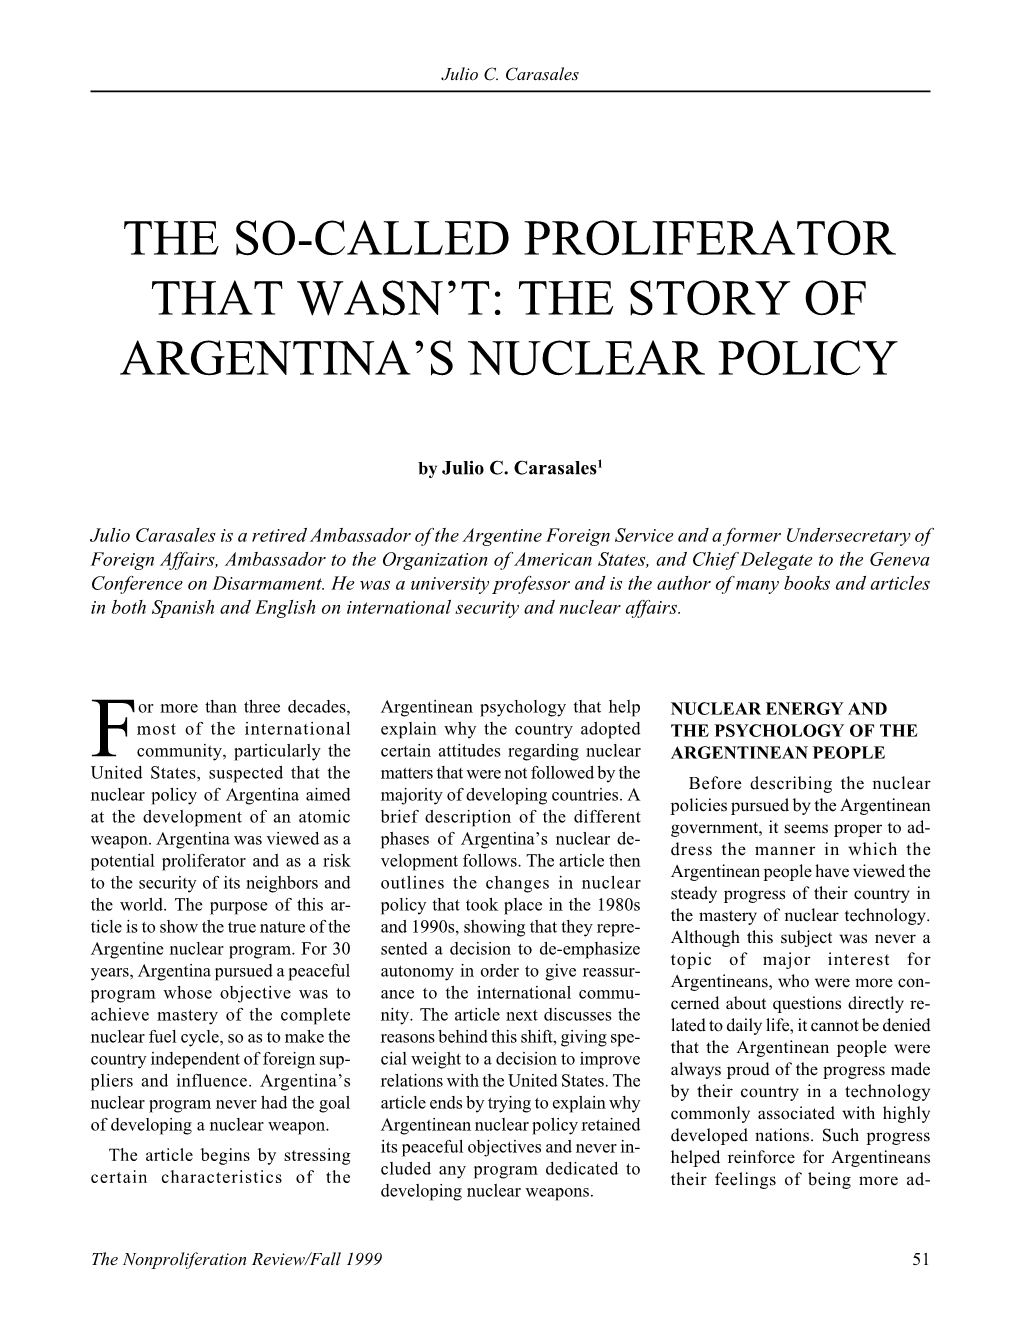 The Story of Argentina's Nuclear Policy